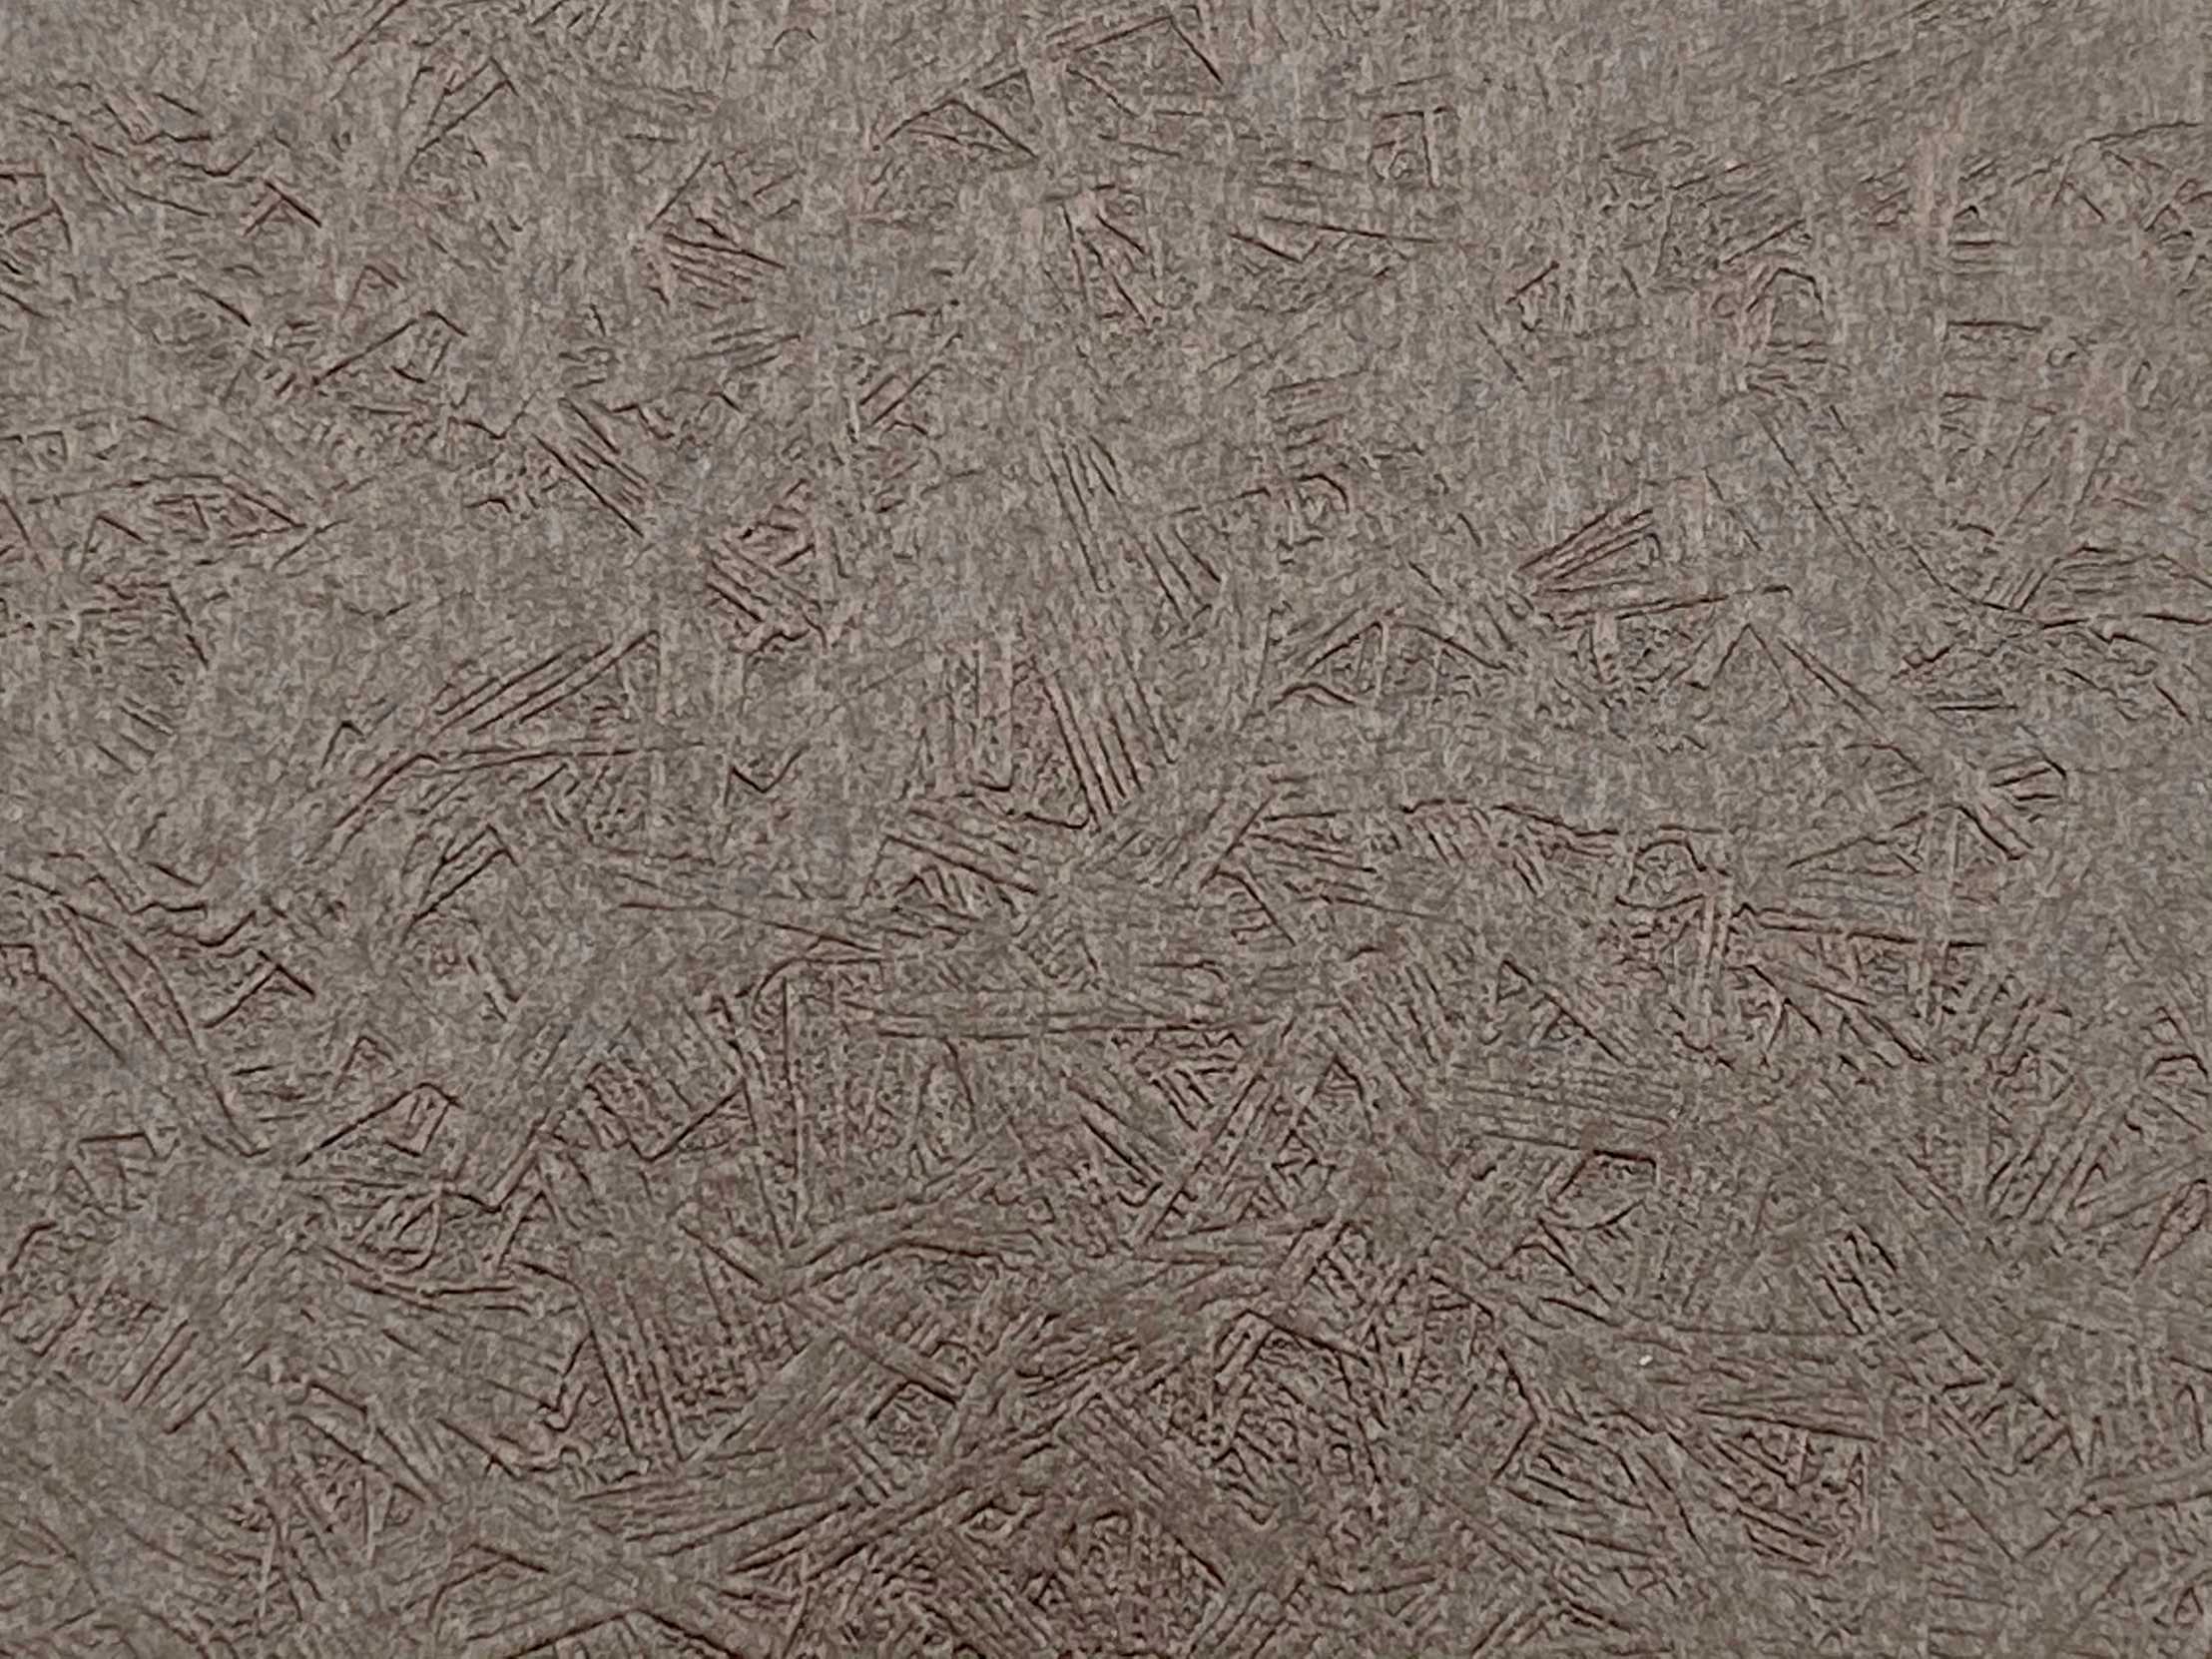 an intricate pattern is displayed on the background